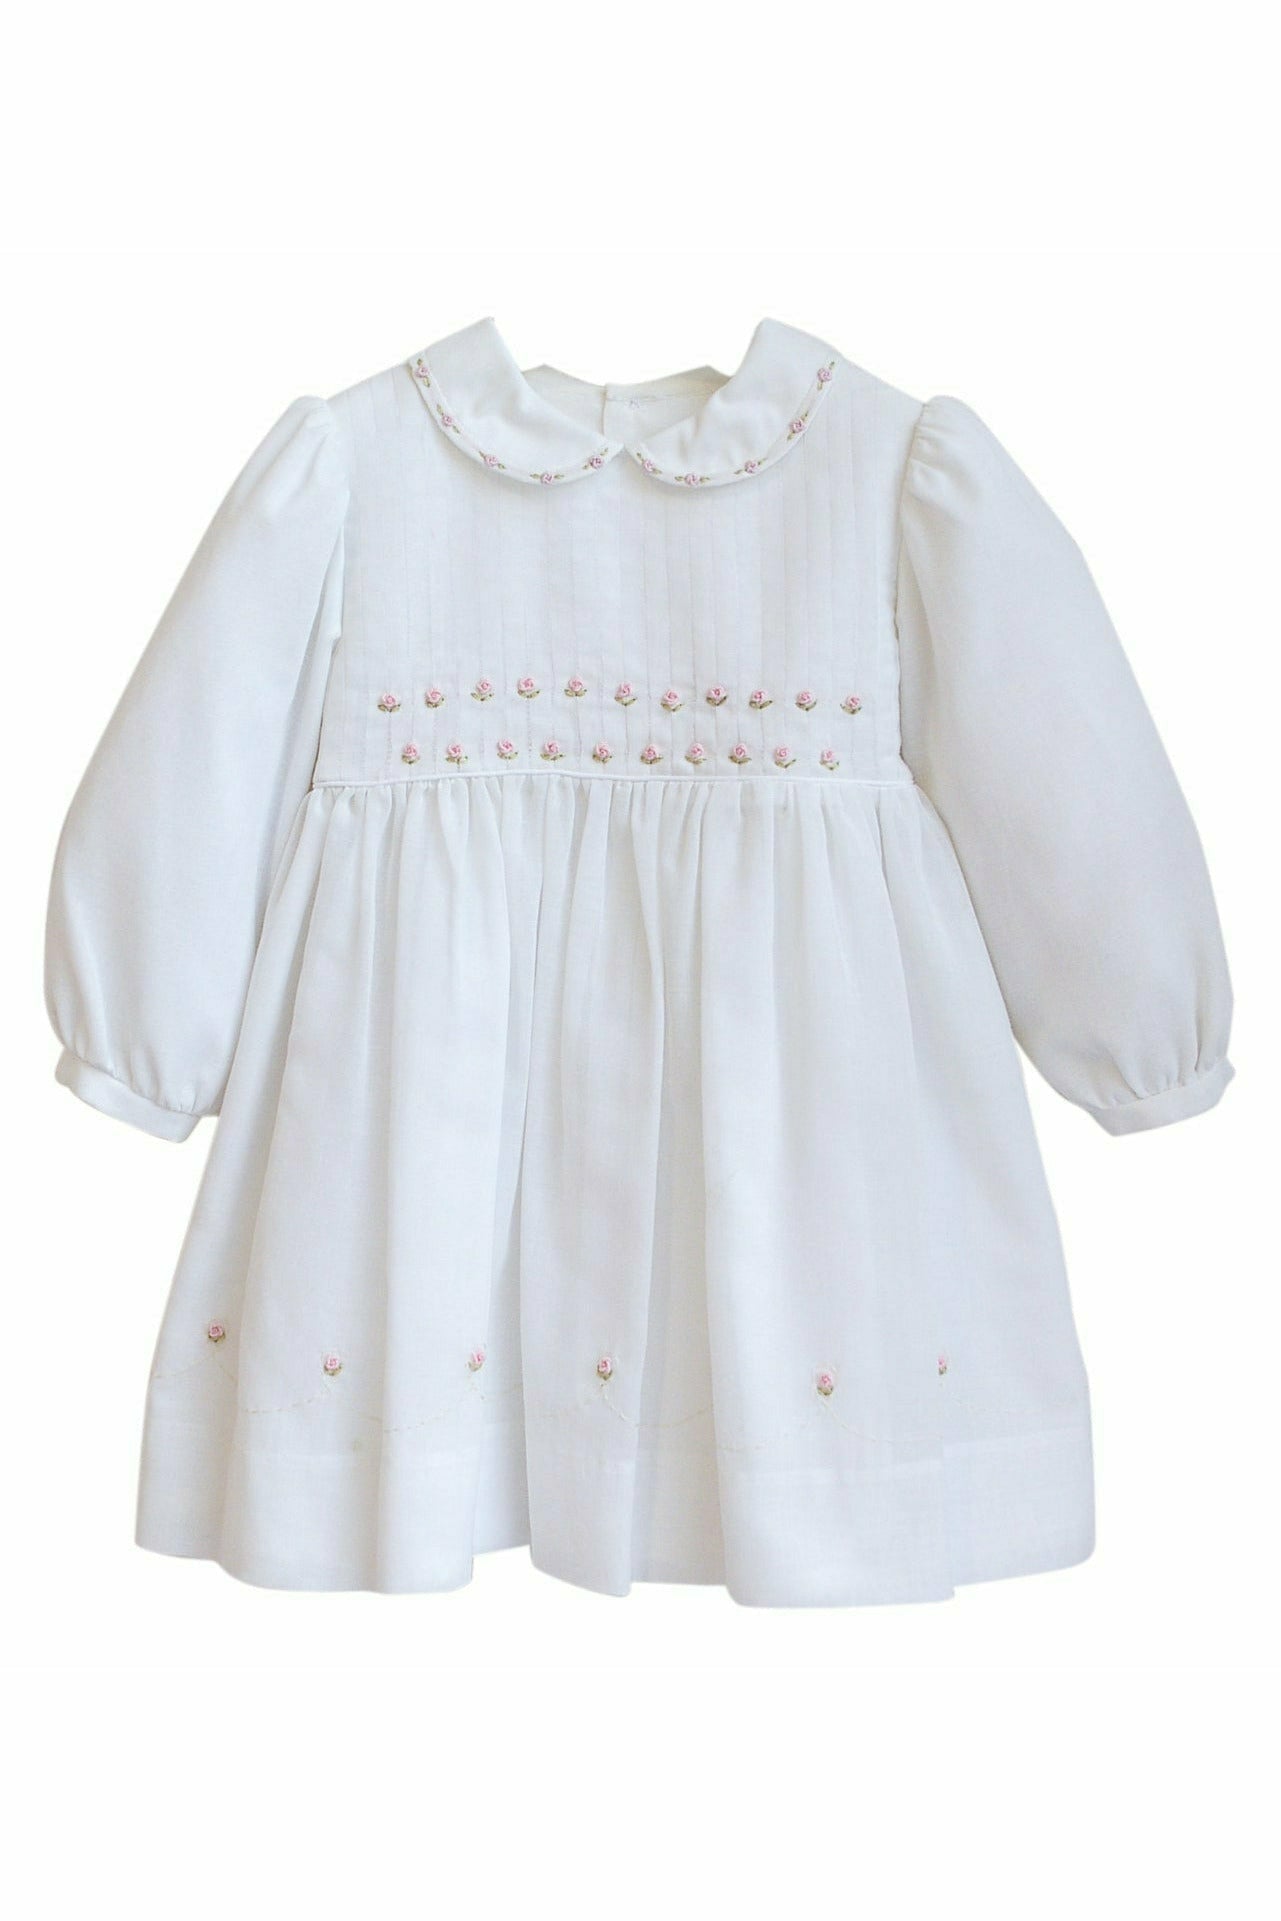 Baby Girl Rose Flowers White Long Sleeve Dress – Carriage Boutique